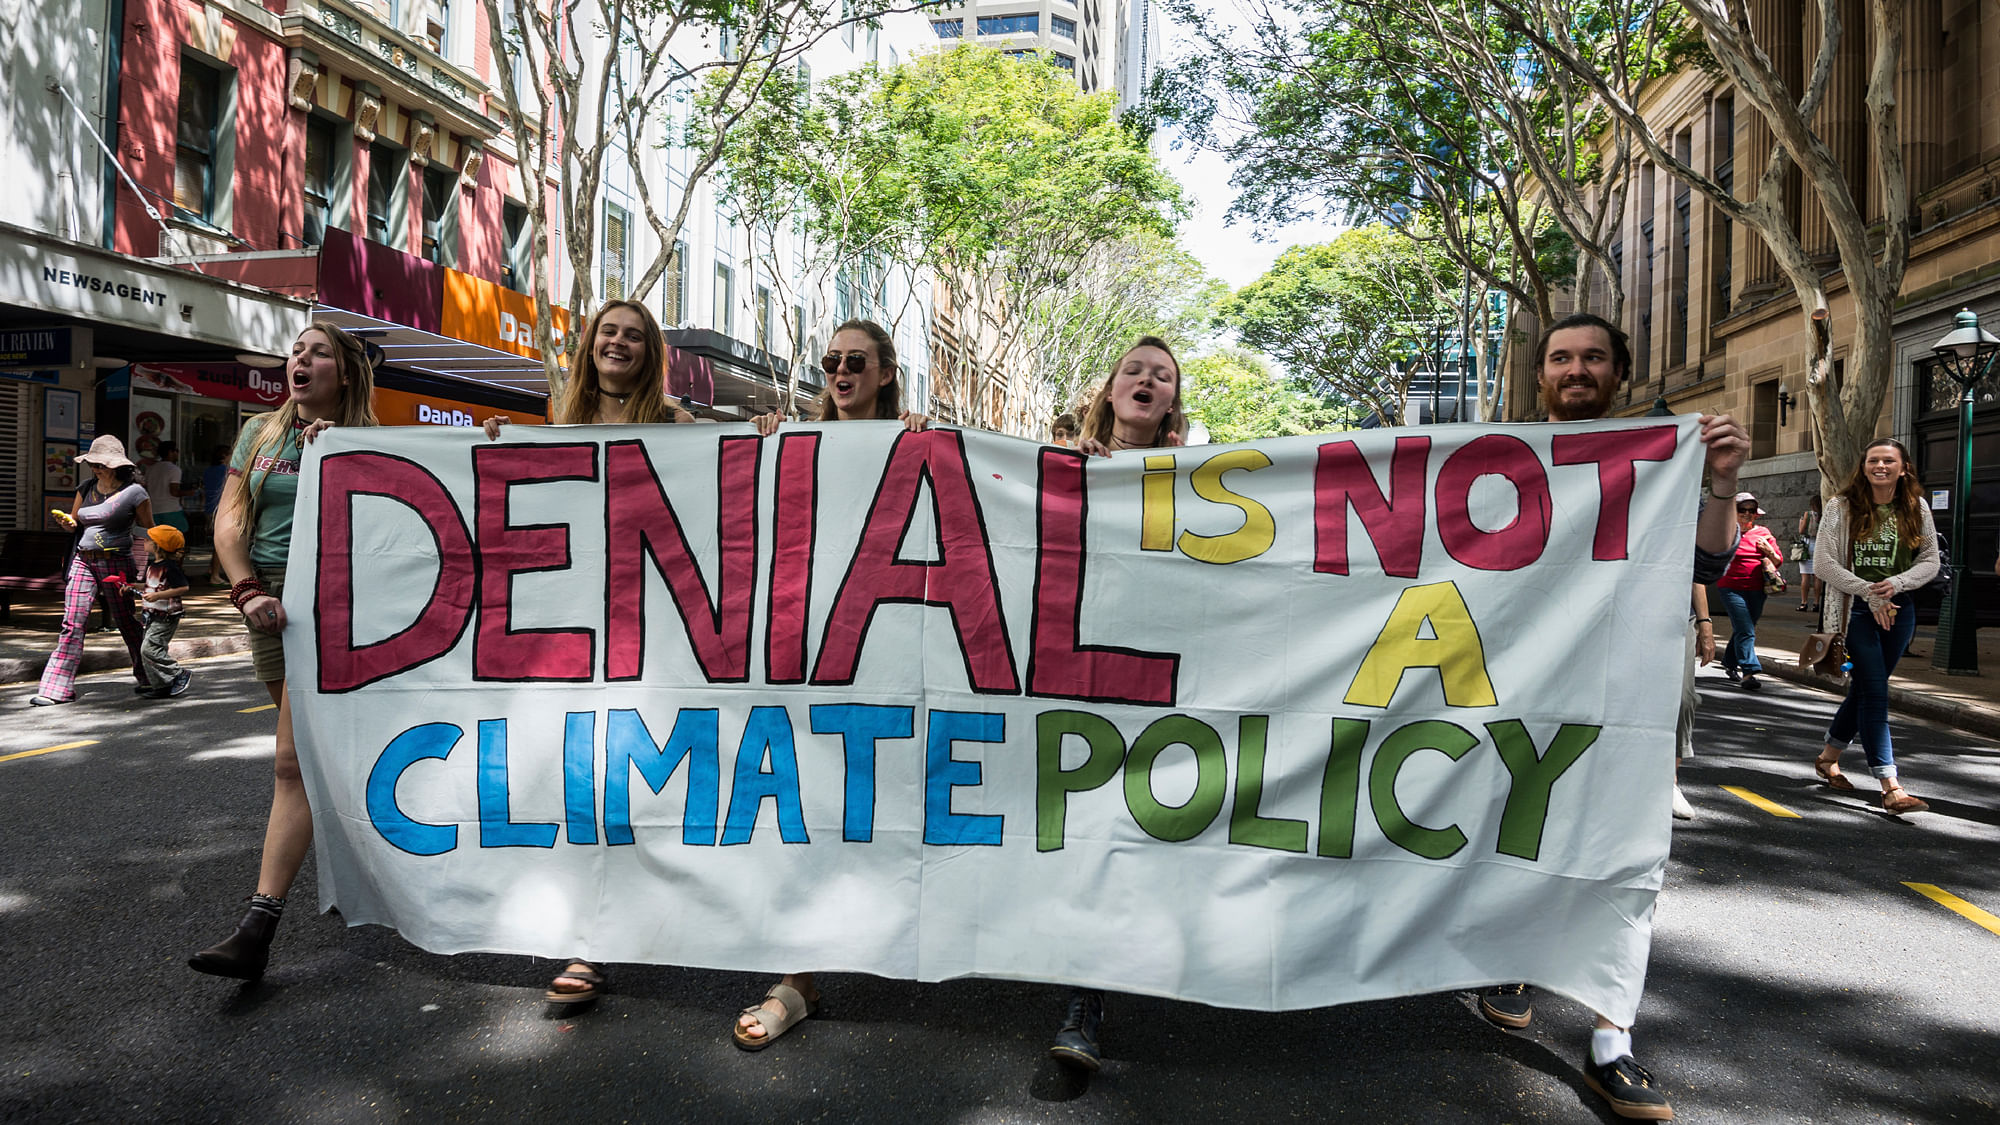 University students demonstrate during the People’s climate March in Brisbane, Australia in March 2014. (Photo: iStockphoto)